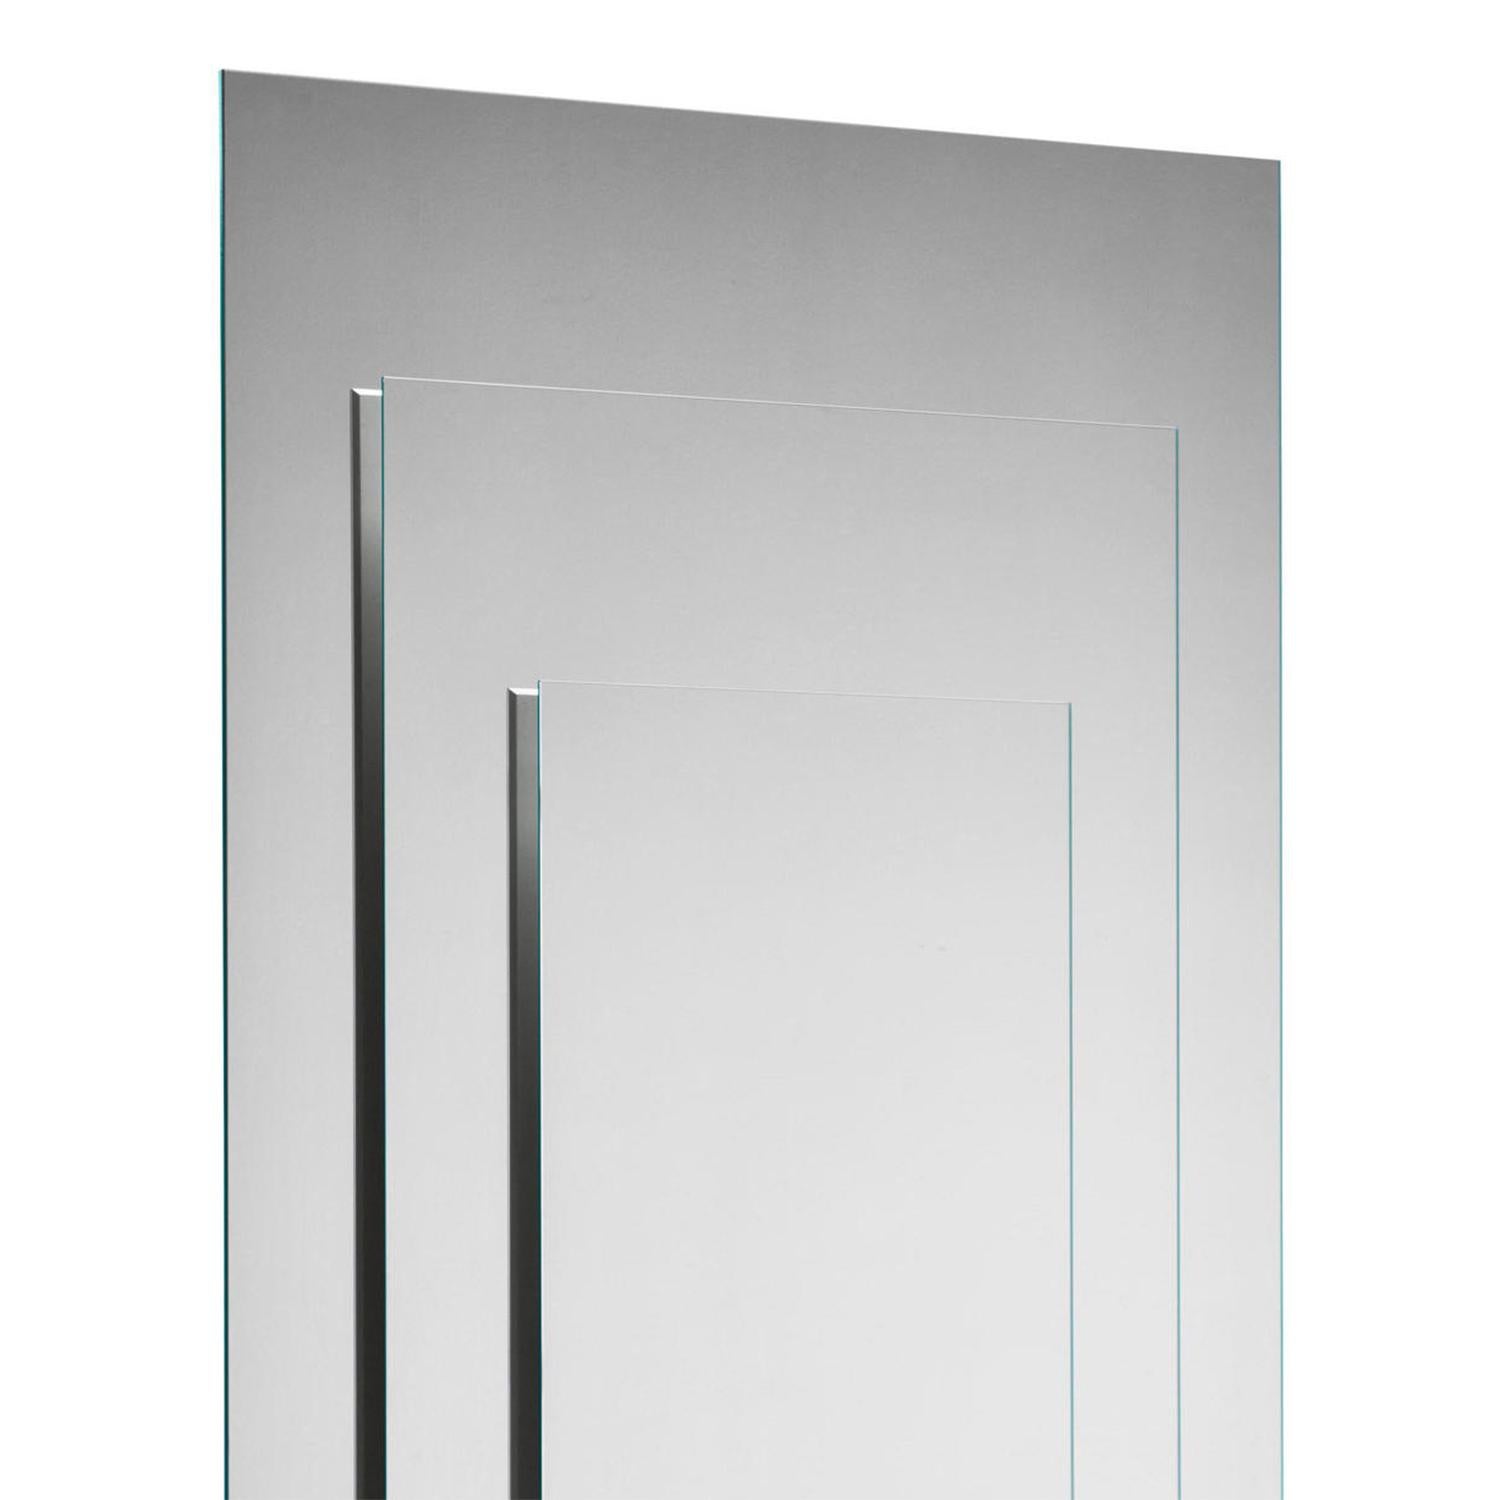 Mirror Pass Big Glass all in mirror glass and with
wooden structure in black finish.
Also available with back mirrored led light system, 
price: 8900,00€ on request.